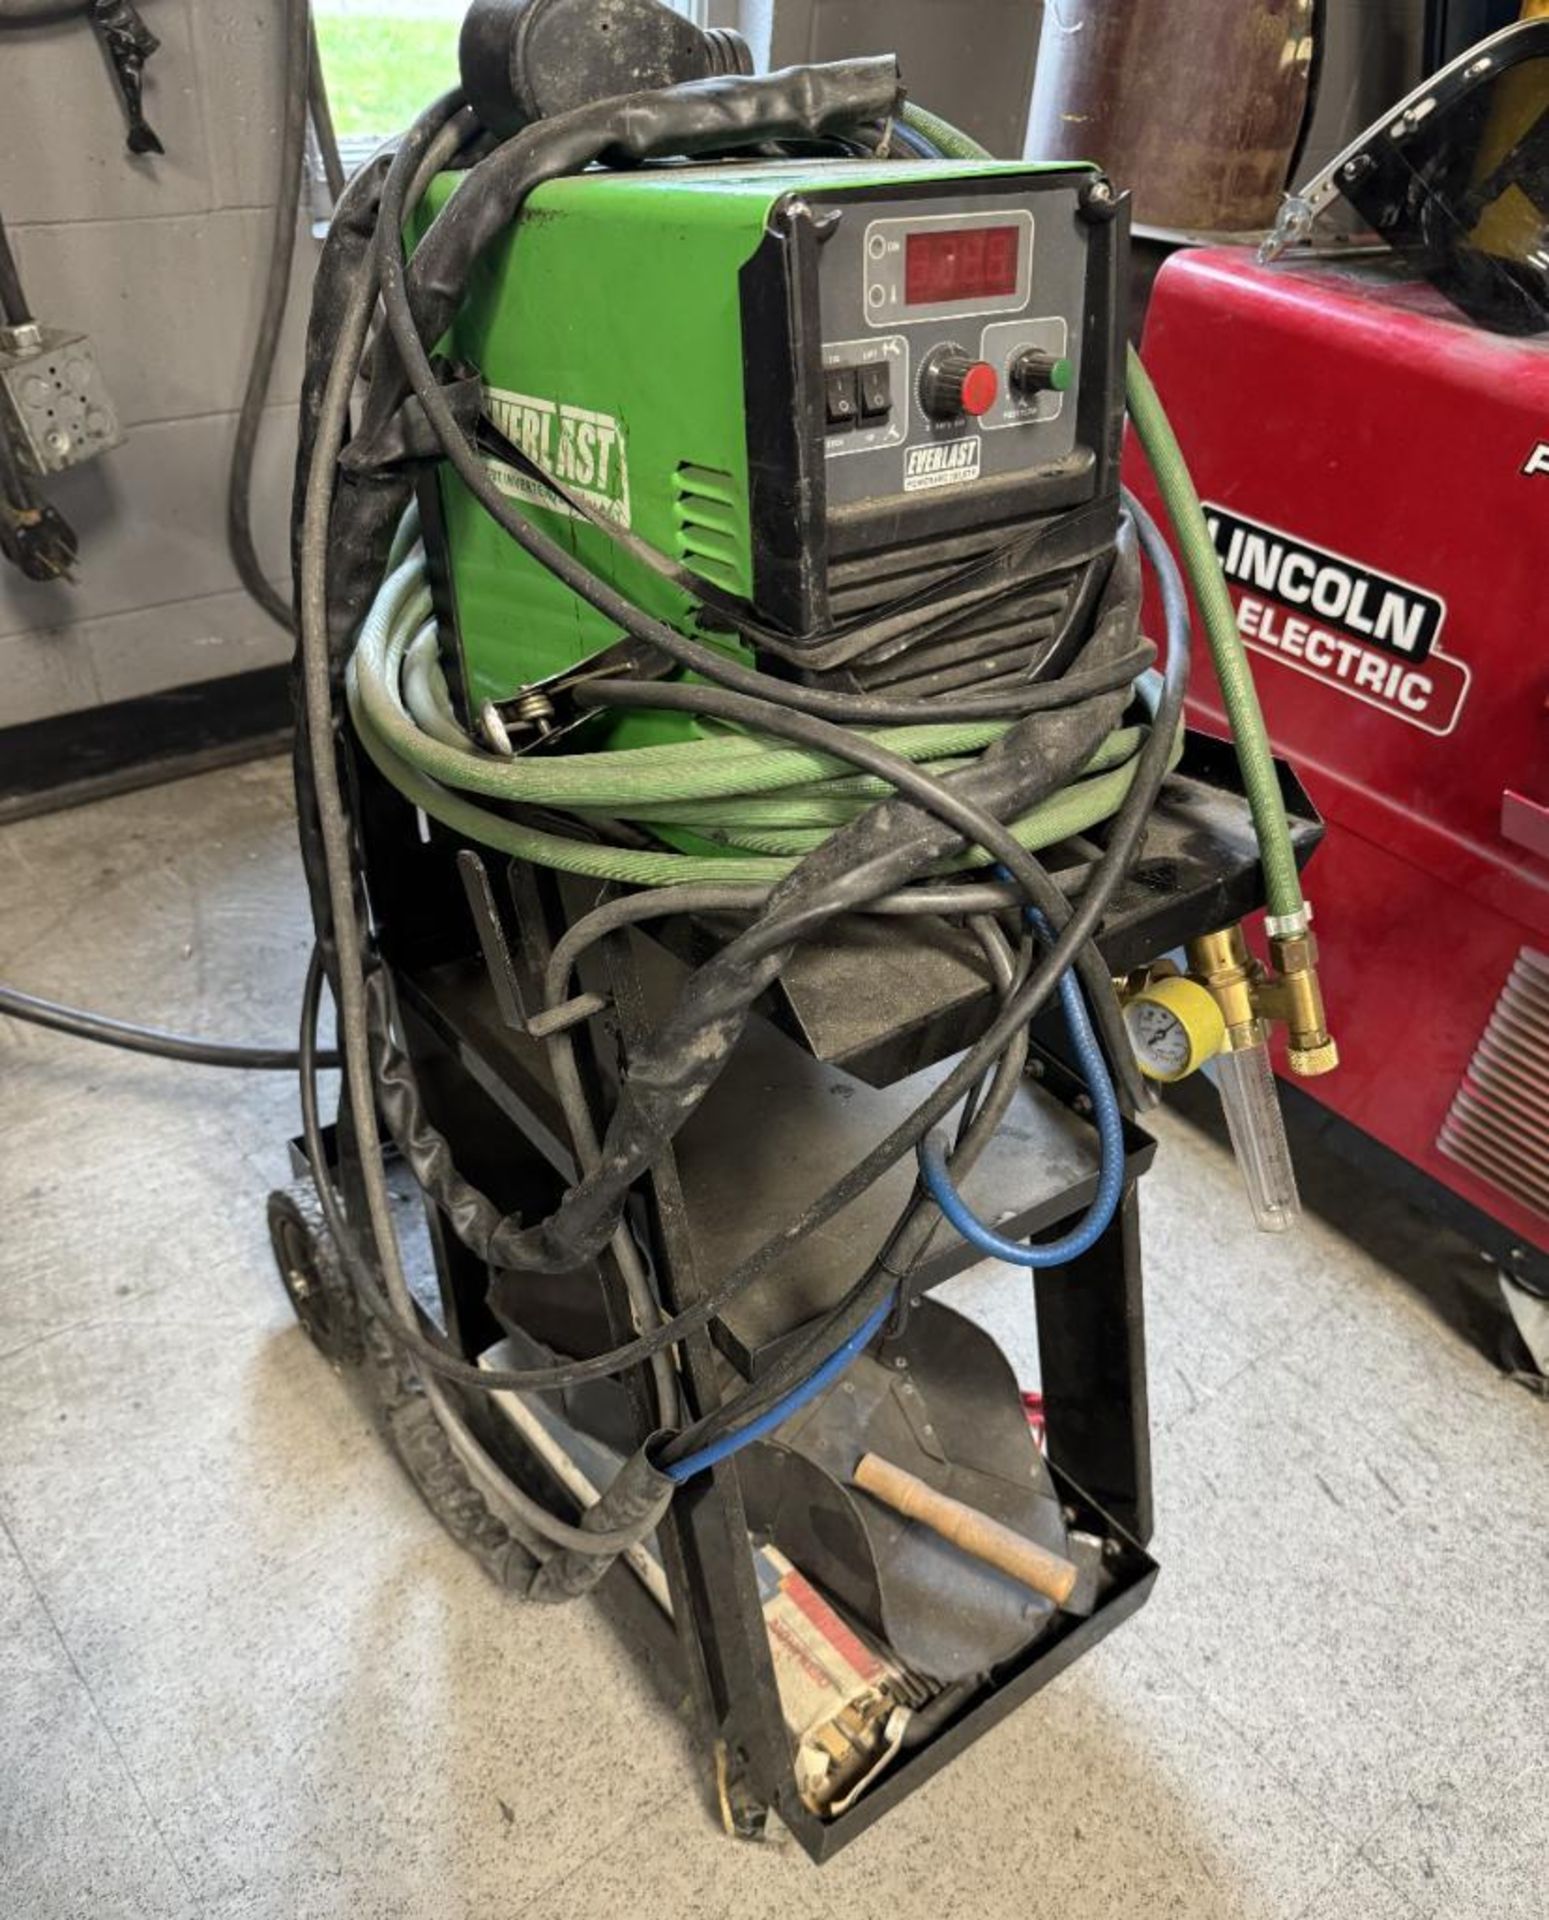 Everlast Powerarc 160 STH DC Tig Welding Machine, Serial# 015900320. With cart. - Image 2 of 5